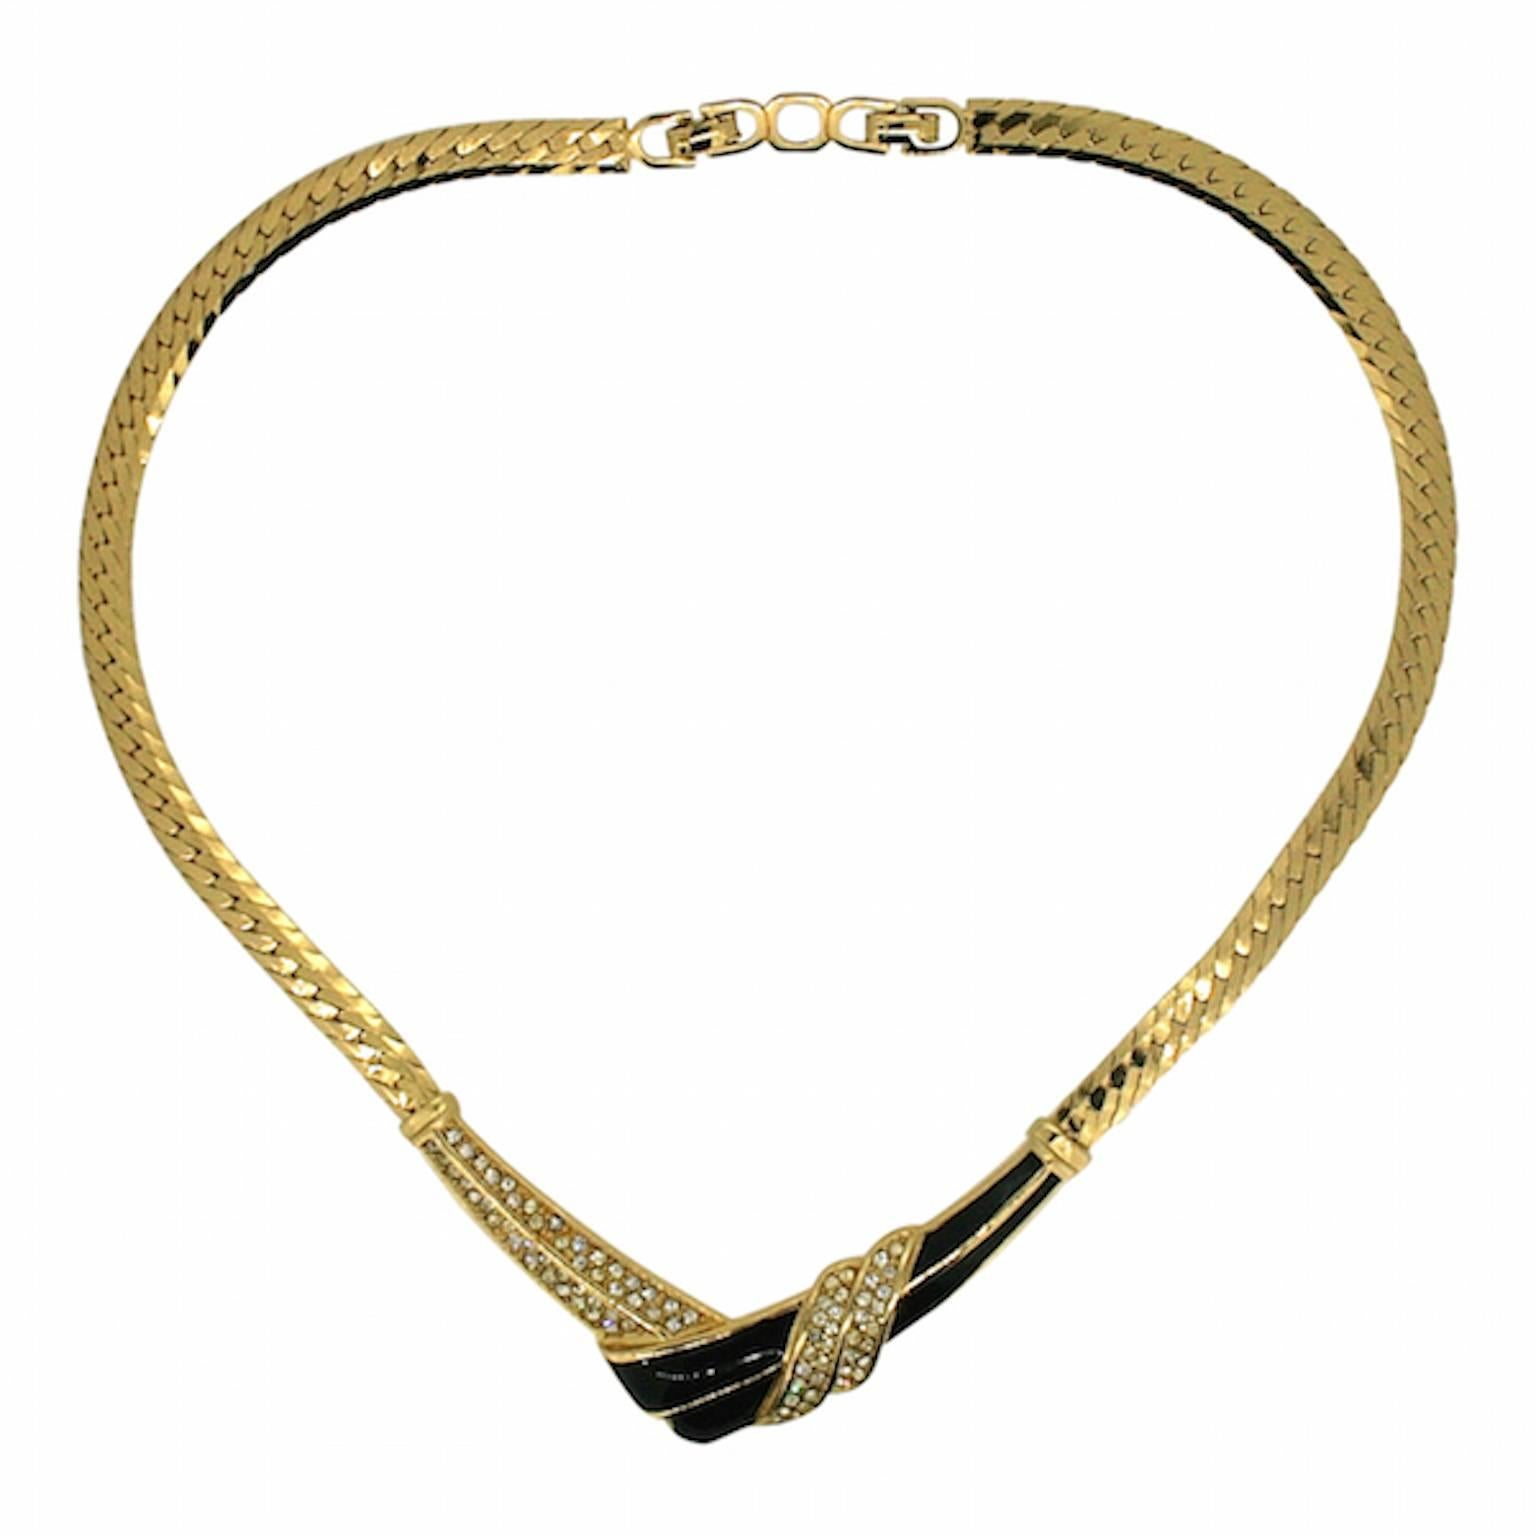 This classic and impactful necklace is by Christian Dior. It was made in the 1970s in Germany for the French fashion house. 
Condition Report:
Very Good - Slight discolouration to one rhinestone. This is only visible upon very close inspection and